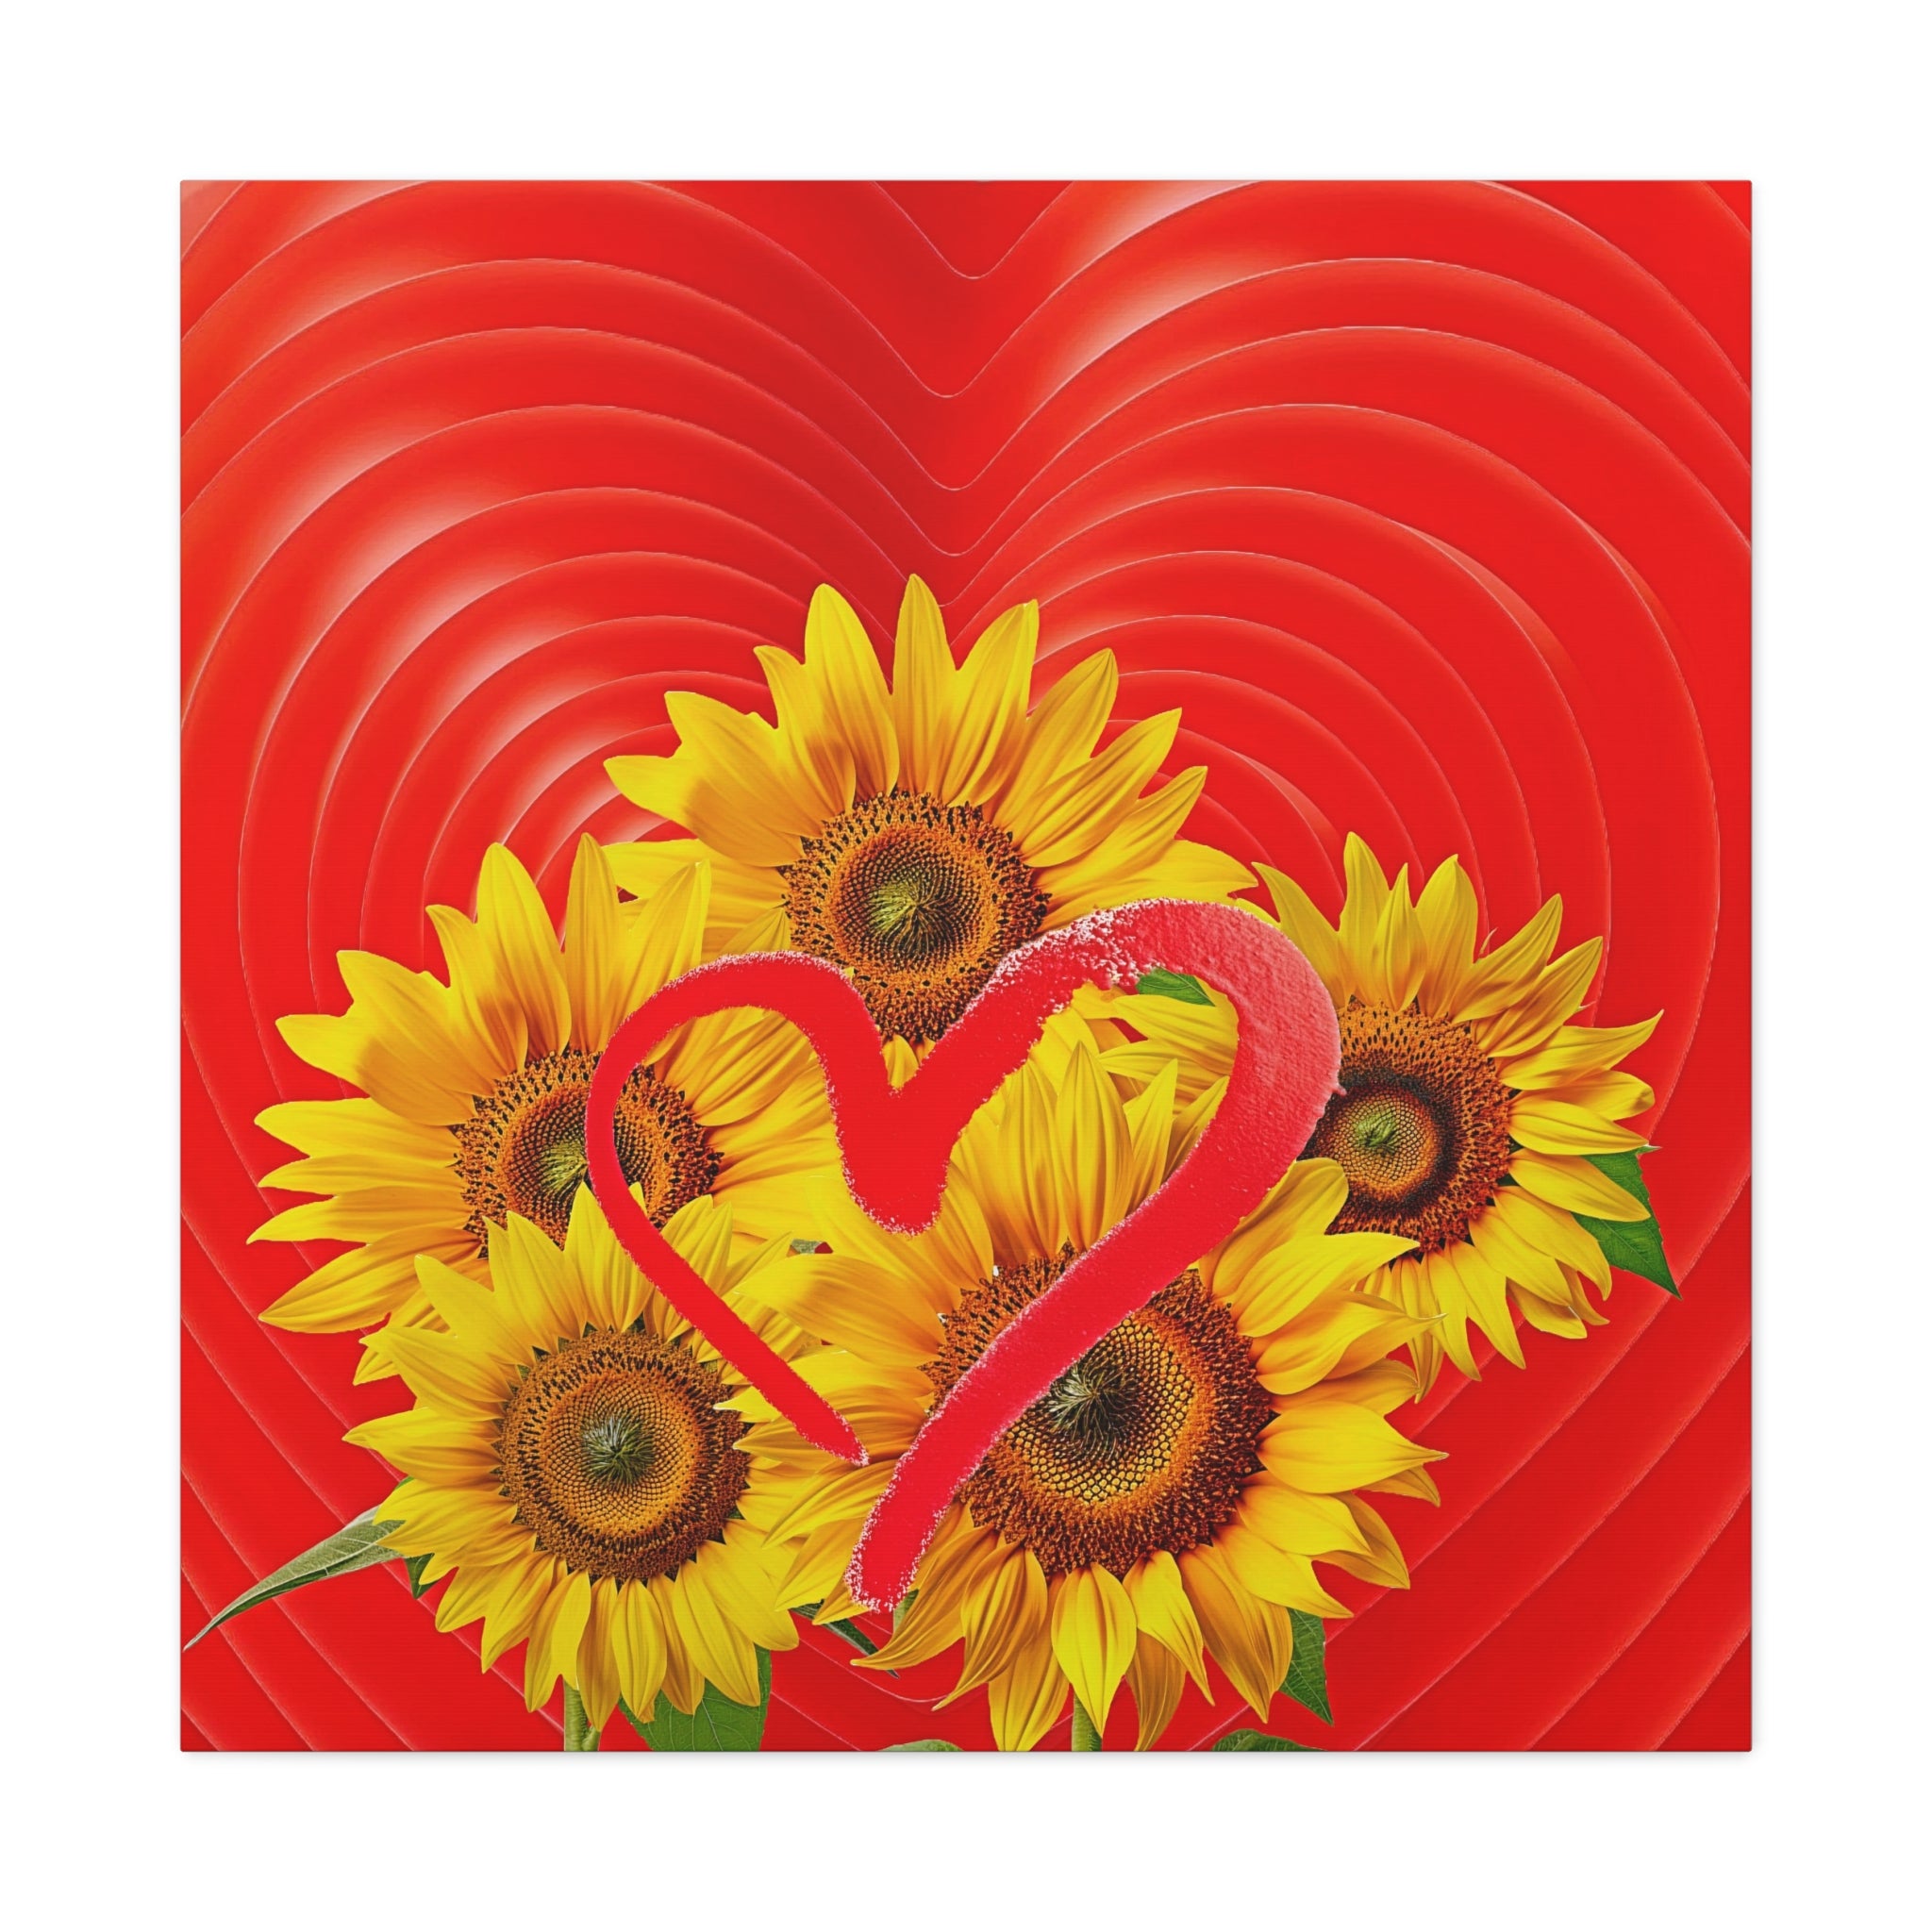 Wall Art LOVE SUNFLOWER Canvas Print Painting Original Giclee 32X32 GW Nice Beauty Fun Design Fit Hot House Home Living Office Gift Ready to Hang